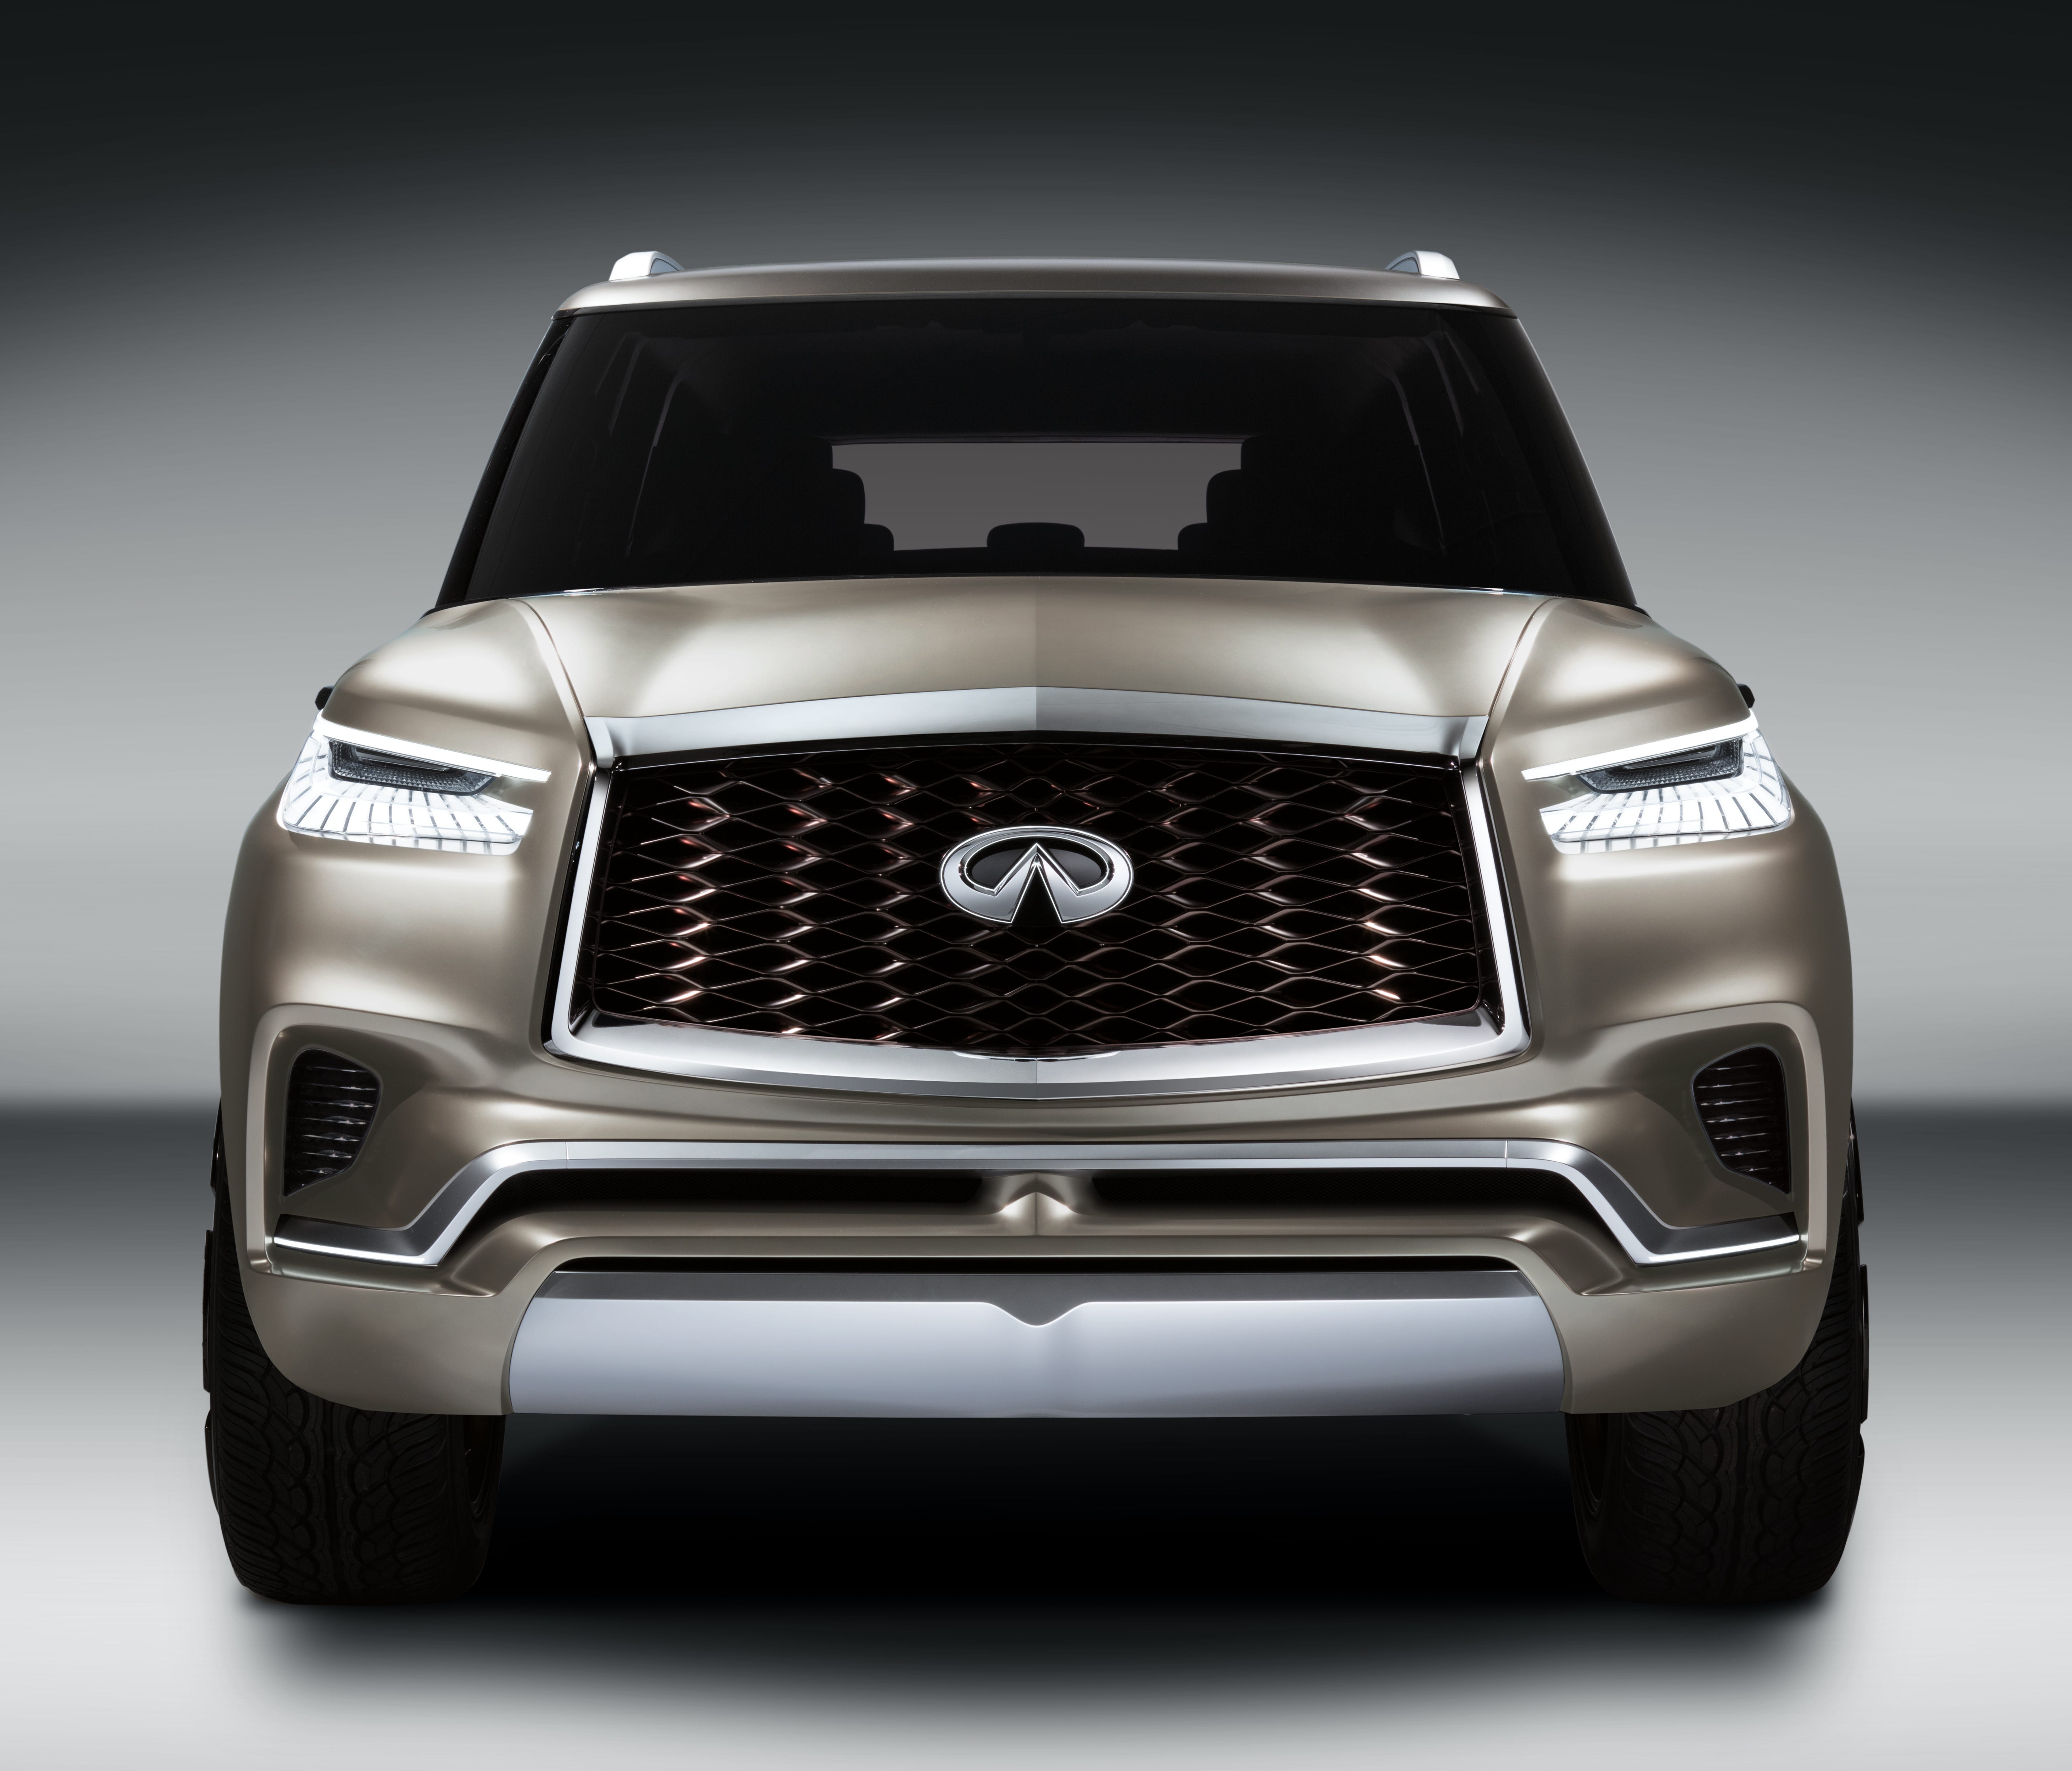 The Infiniti QX80 Monograph is a new design study